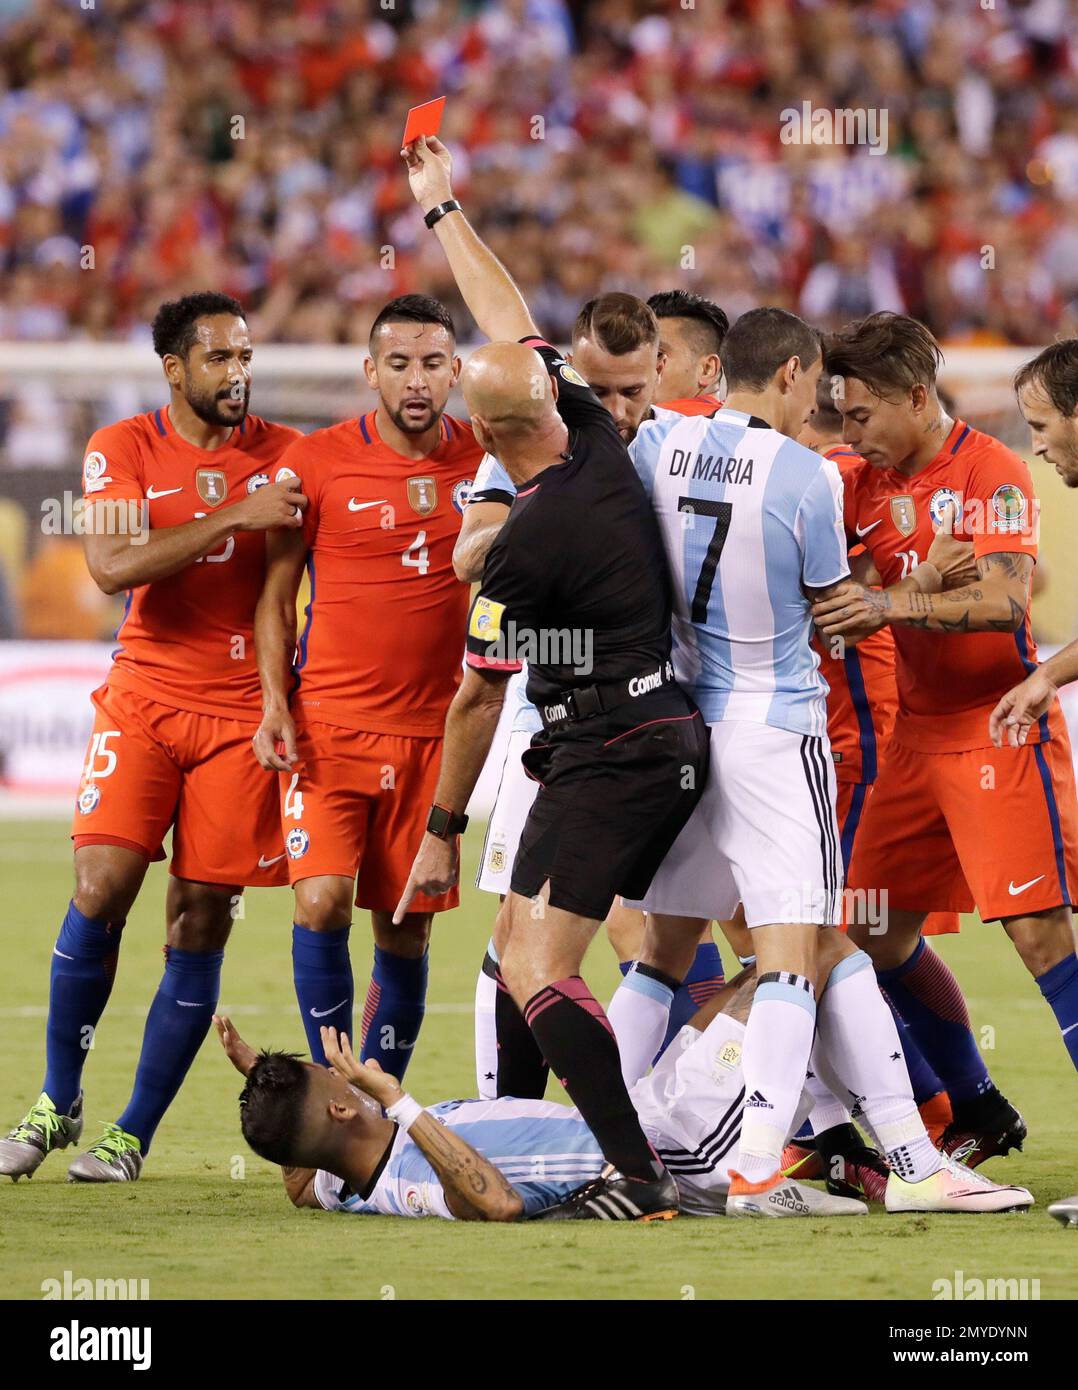 Brig Kakadu salgsplan Referee Heber Lopes of Brazil points to Argentina's Marcos Rojo (16) as he  gives him a red card during the first half of the Copa America Centenario  championship soccer match, Sunday, June